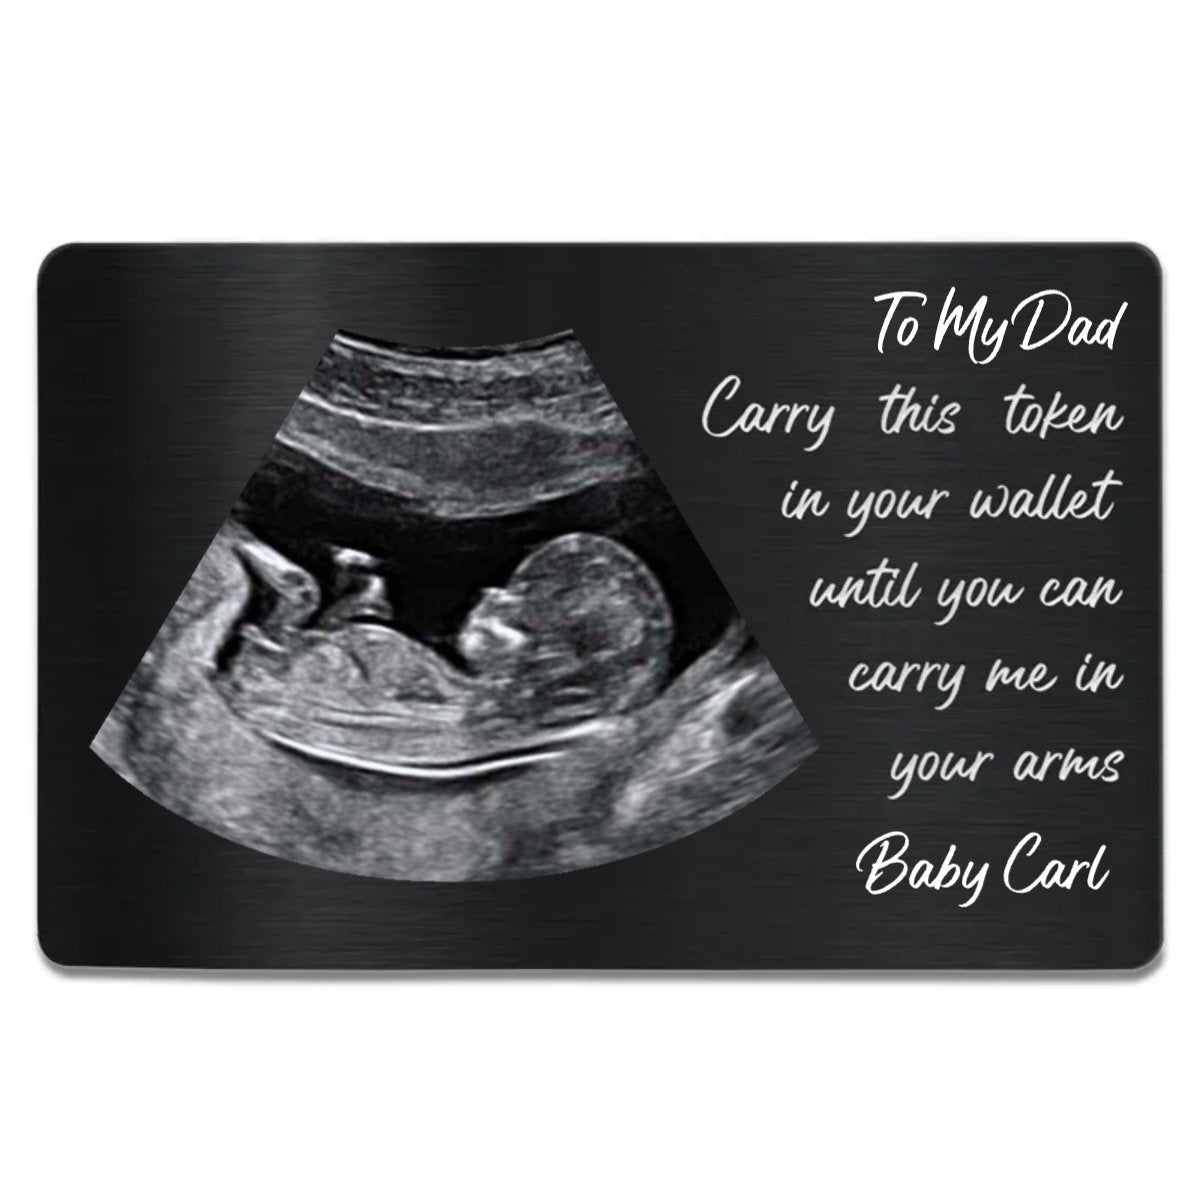 Father - Carry This Token In Your Wallet Until You Can Carry Me In Your Arms - Personalized Aluminum Wallet Card (HL) - The Next Custom Gift